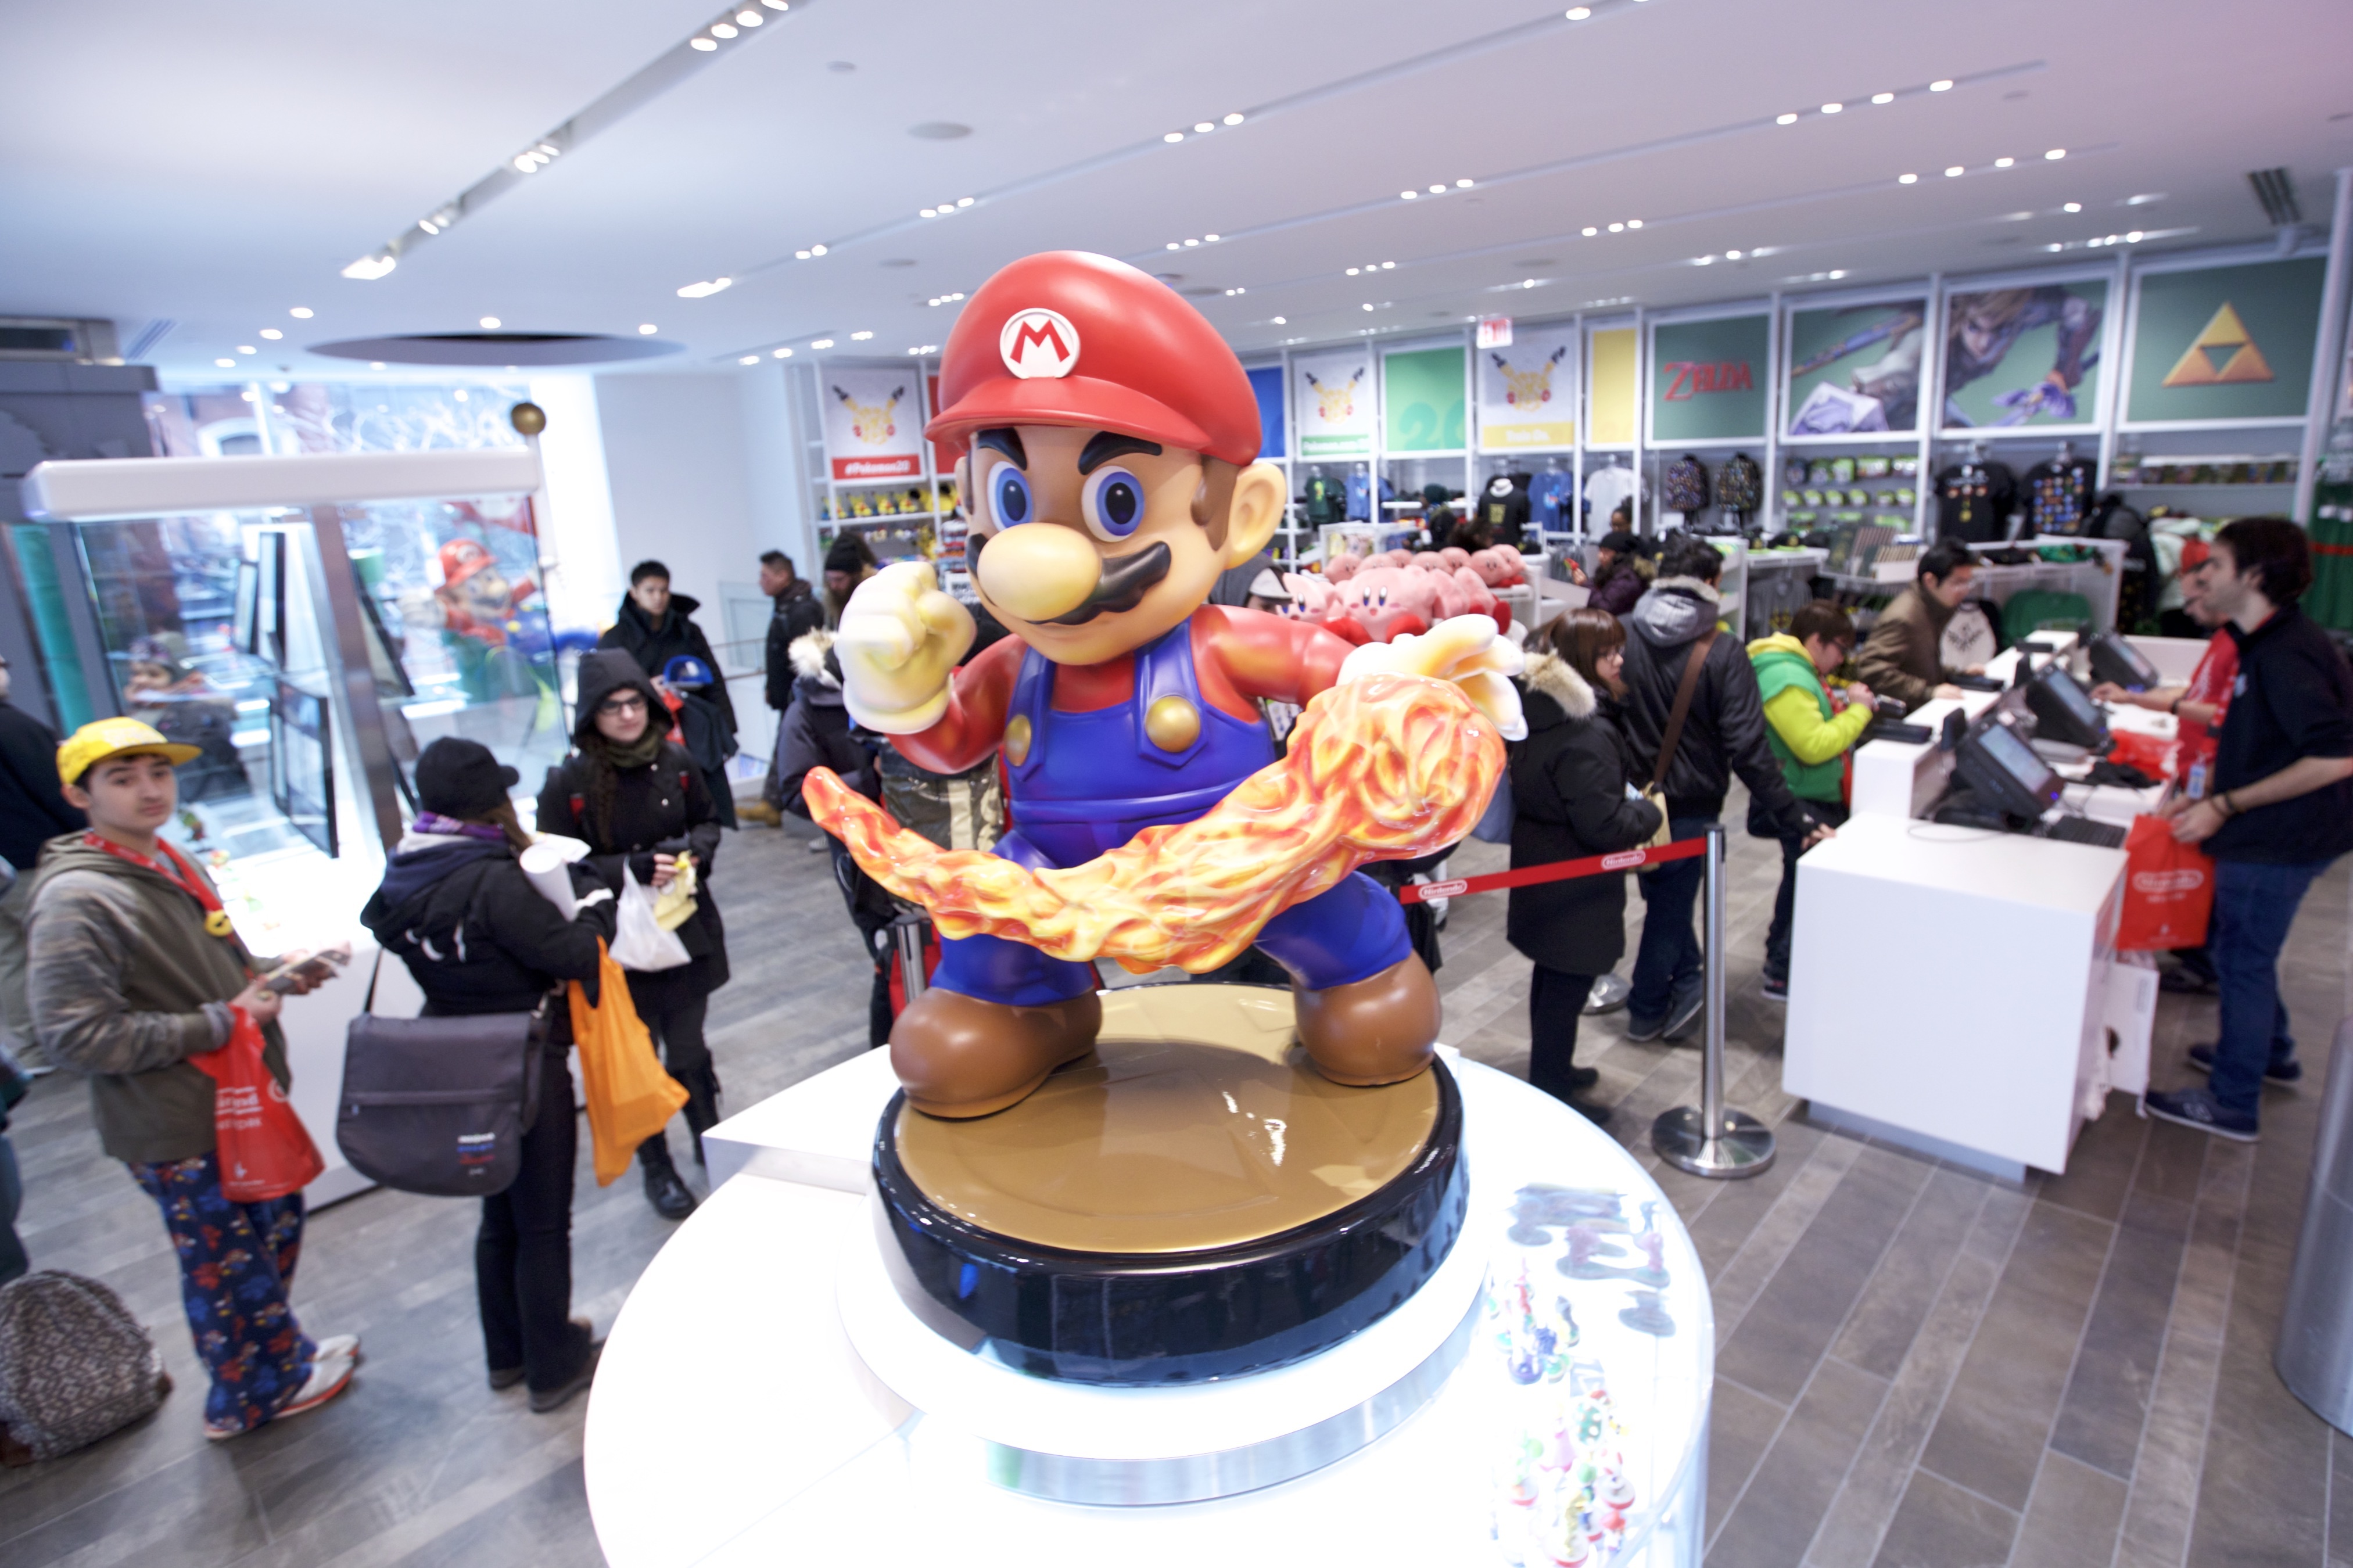 Nintendo Store in NYC Tour - Summer 2019 